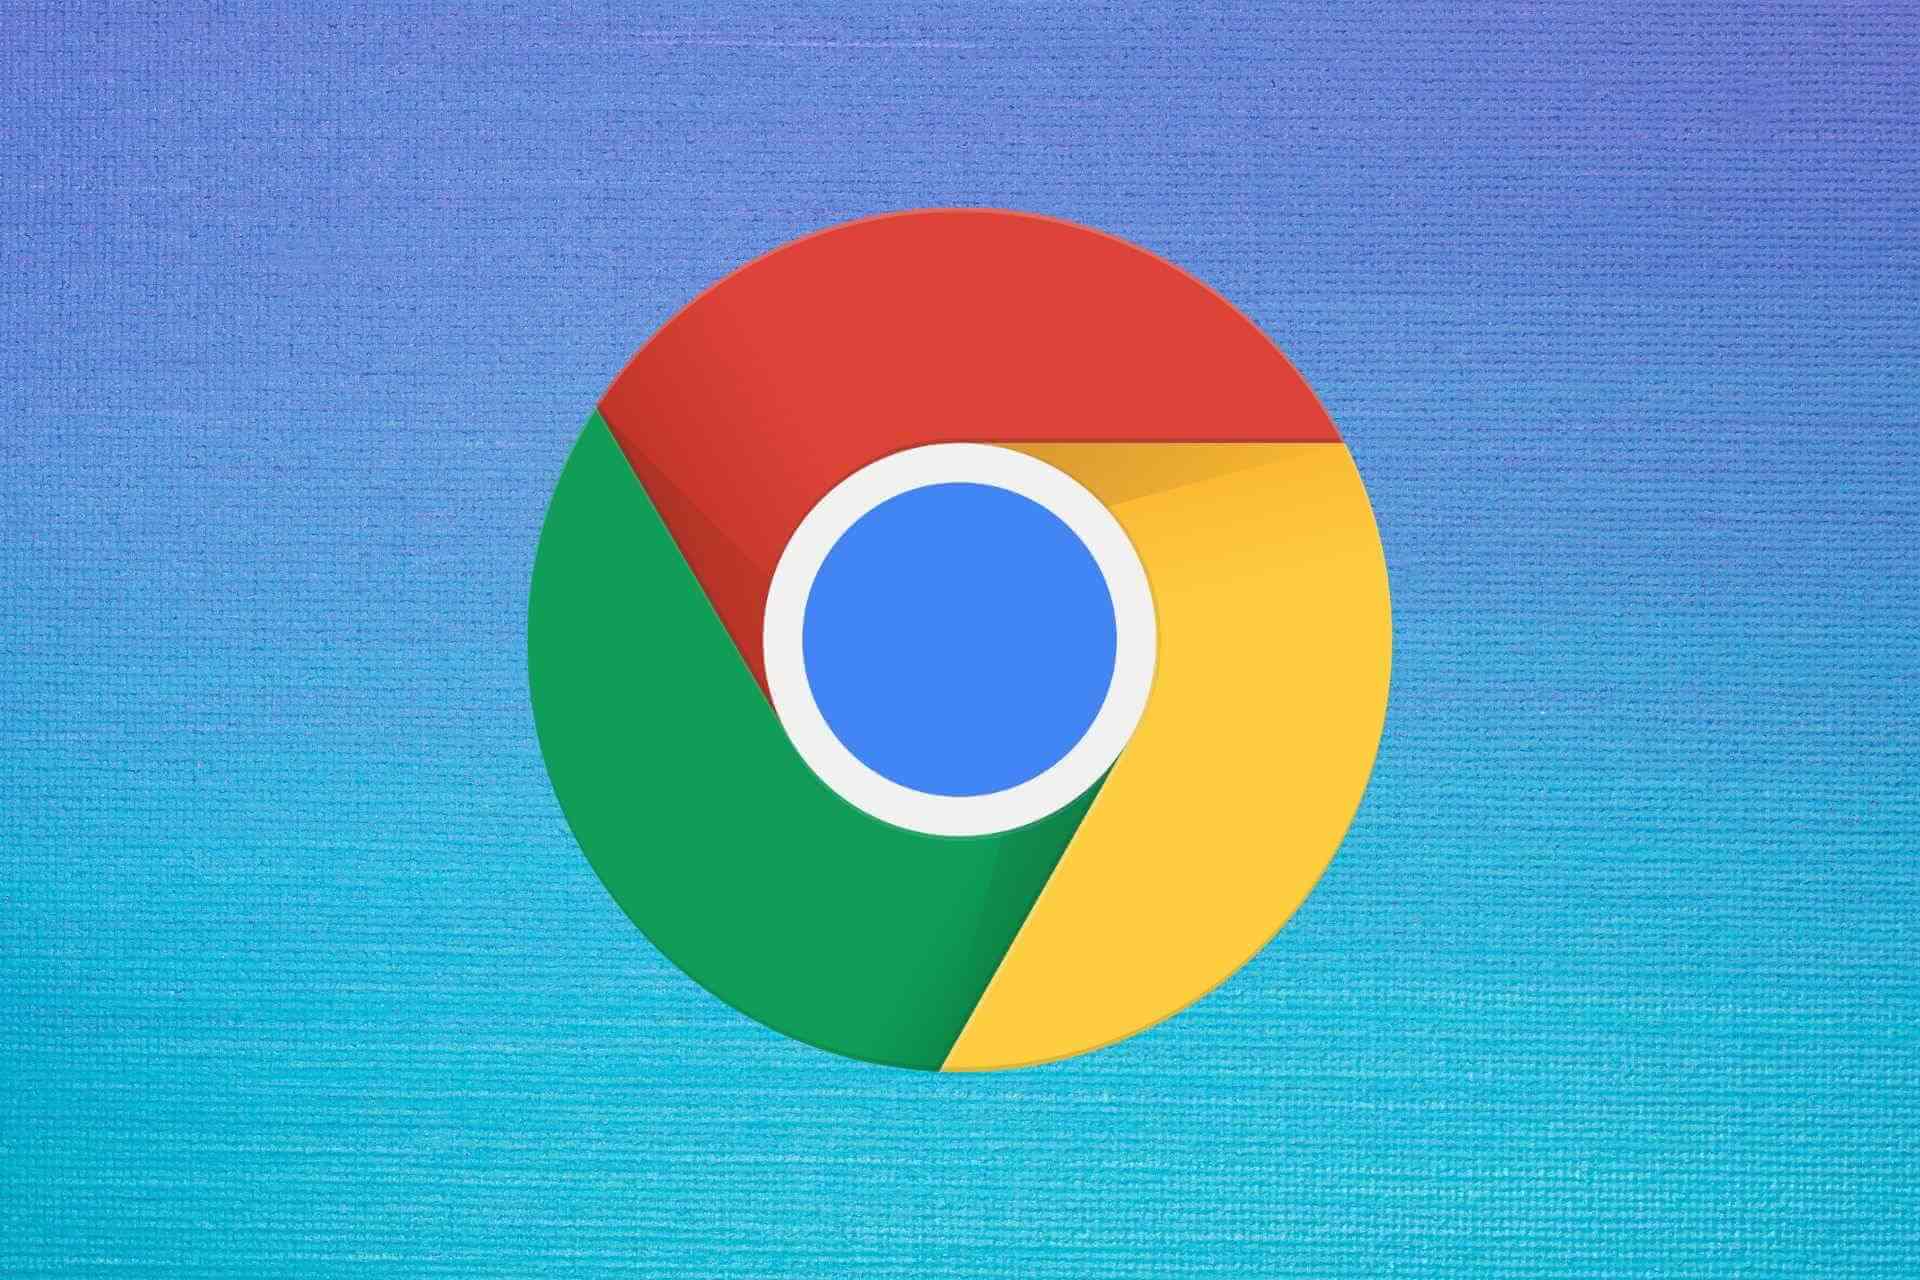 Google Chrome 114.0.5735.134 download the new